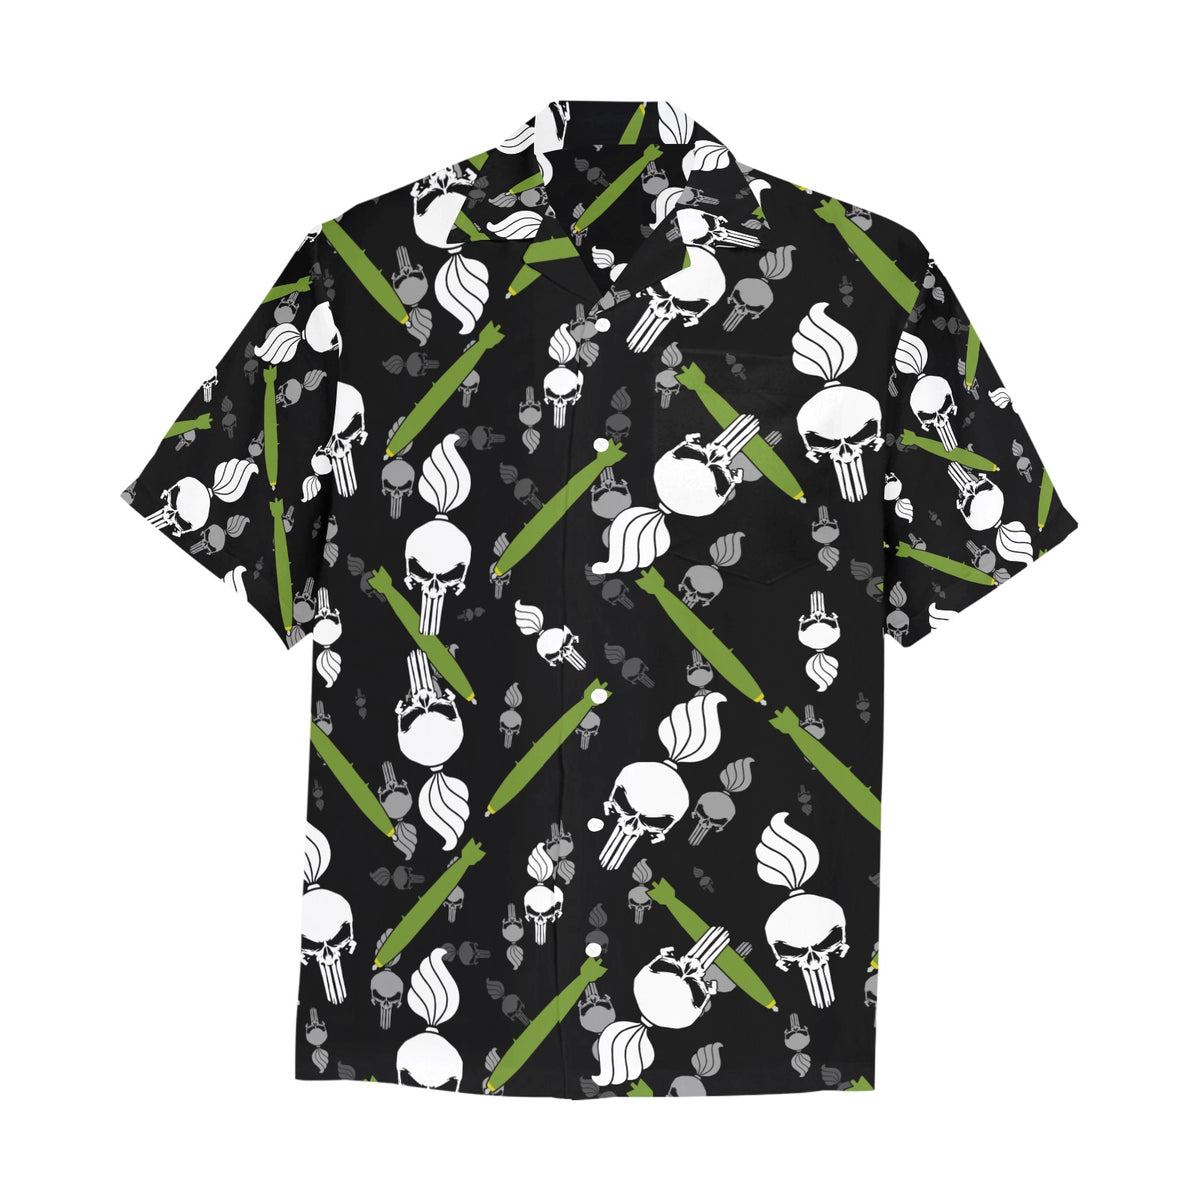 Punisher Skull Pisspots and Bombs Front Left Chest Pocket Hawaiian ...